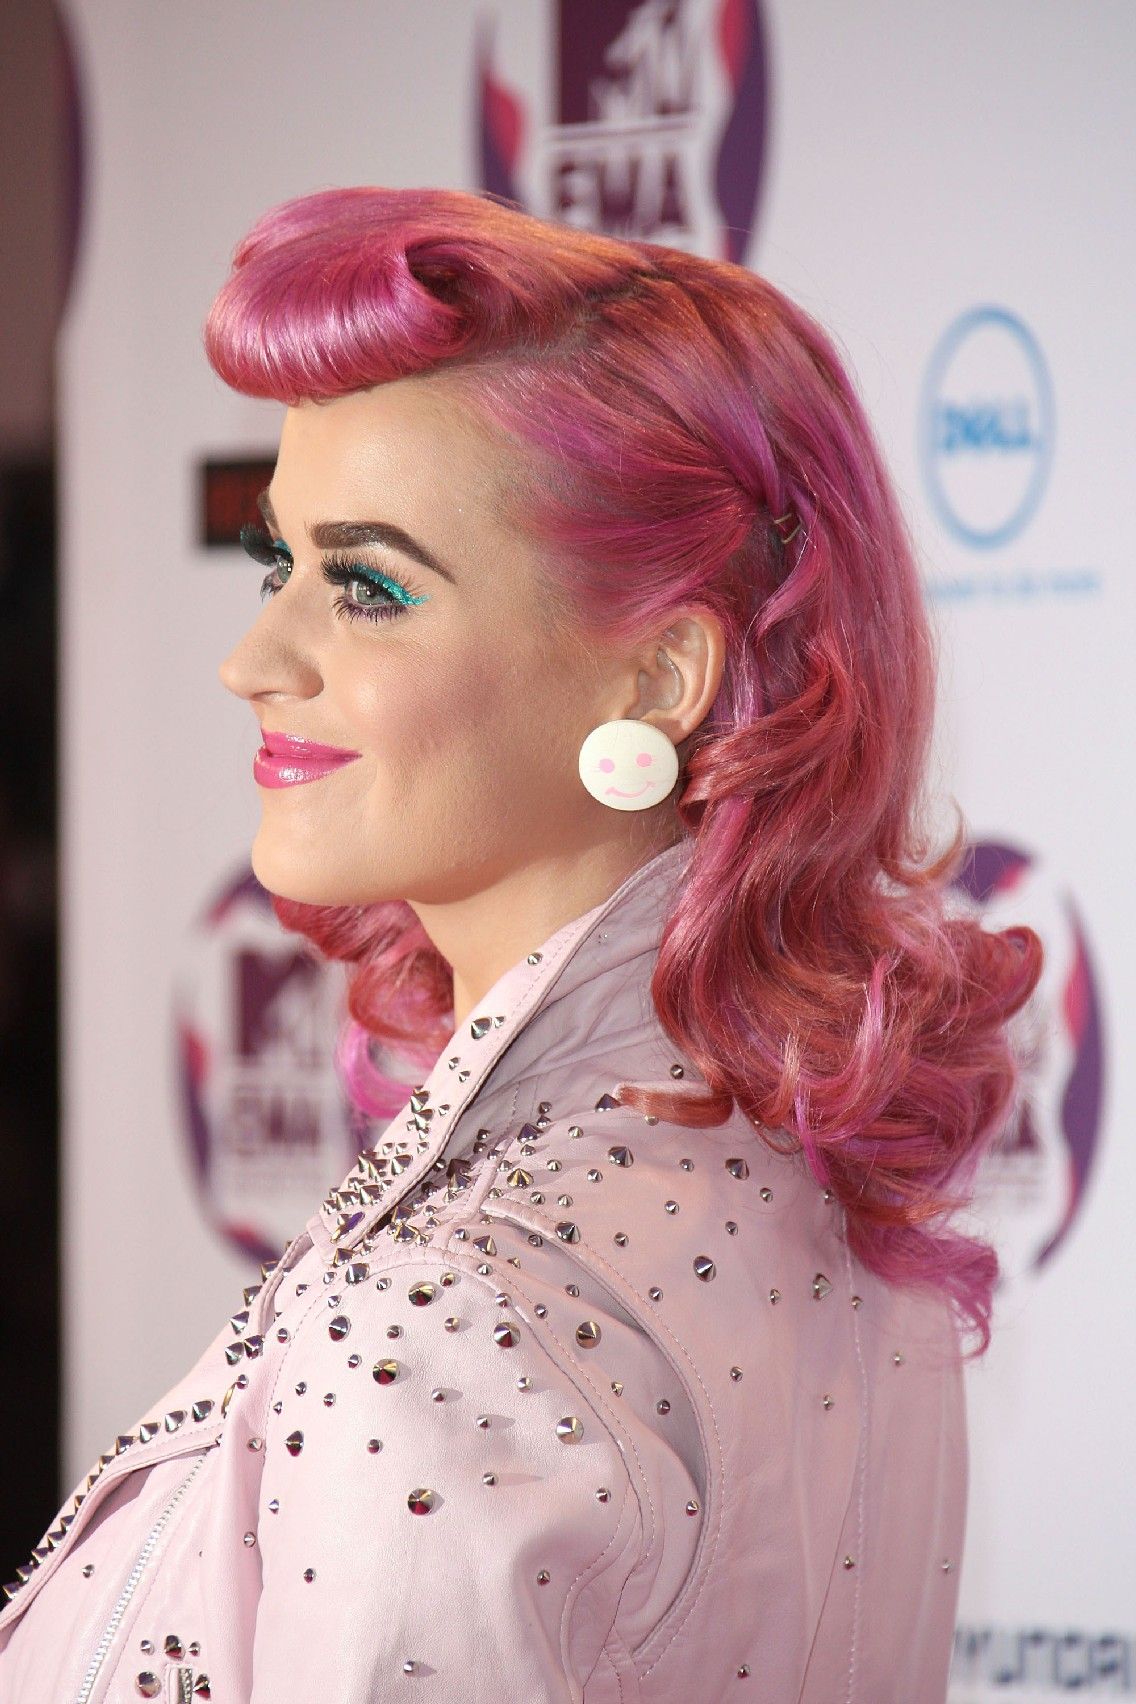 Katy Perry at MTV Europe Music Awards 2011 - Arrivals | Picture 118153